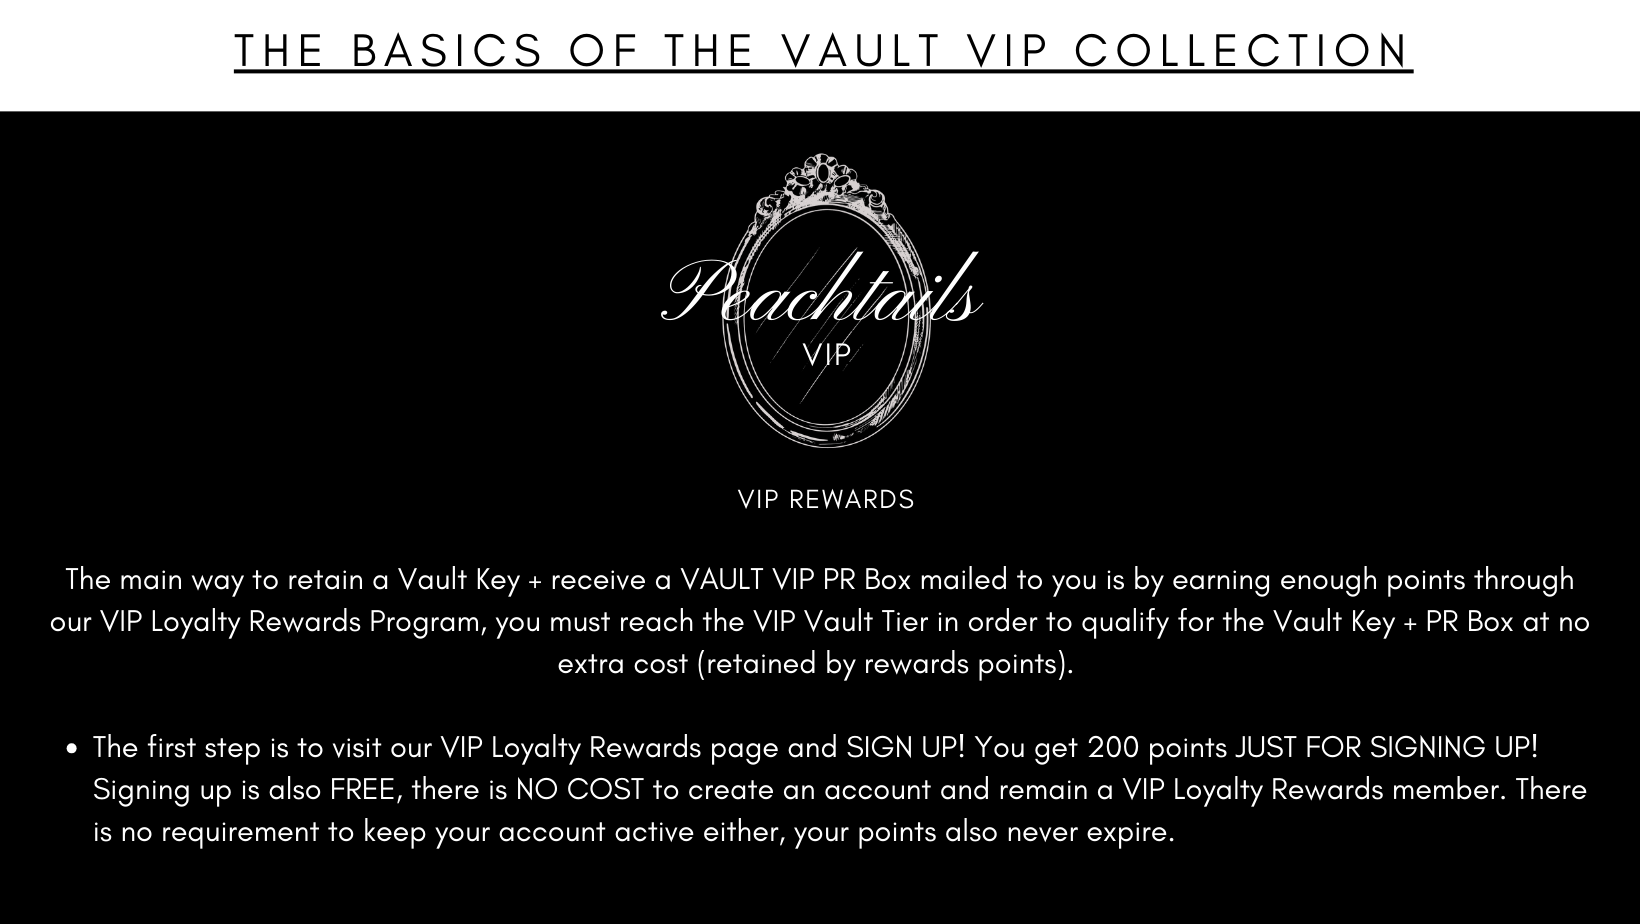 The image has a black background with white text at the top stating "THE BASICS OF THE VAULT VIP COLLECTION." Below is the "Peachtails VIP" logo inside an ornate oval frame, followed by the subtitle "VIP REWARDS." The text explains that customers can retain a Vault Key and receive a VAULT VIP PR Box by earning points through the VIP Loyalty Rewards Program, reaching the VIP Vault Tier without extra costs. Points are free upon sign-up, do not expire, and there's no cost to maintain VIP status.